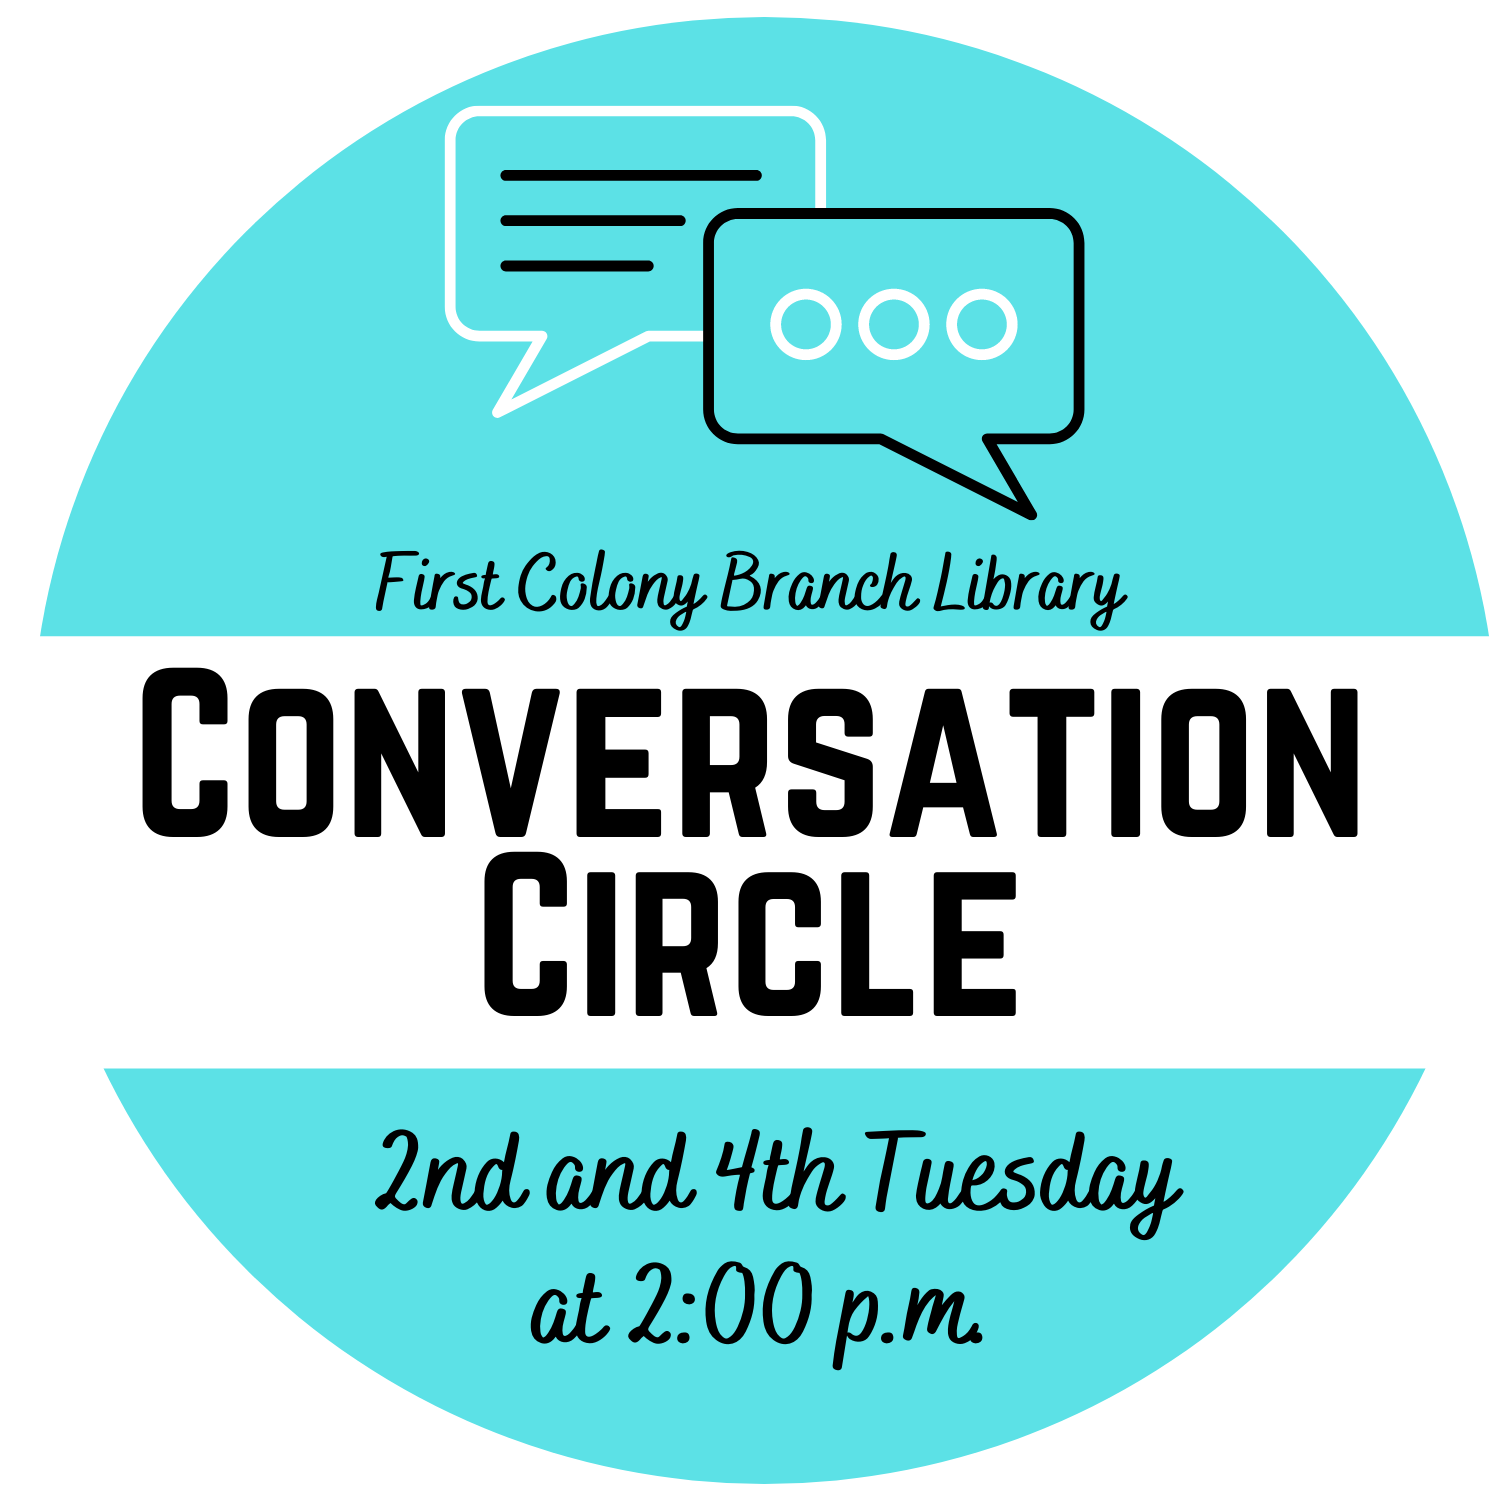 Teal circle with white line. Text reads "First Colony Branch Library Conversation Circle; 2nd and 4th Tuesday at 2:00 p.m."